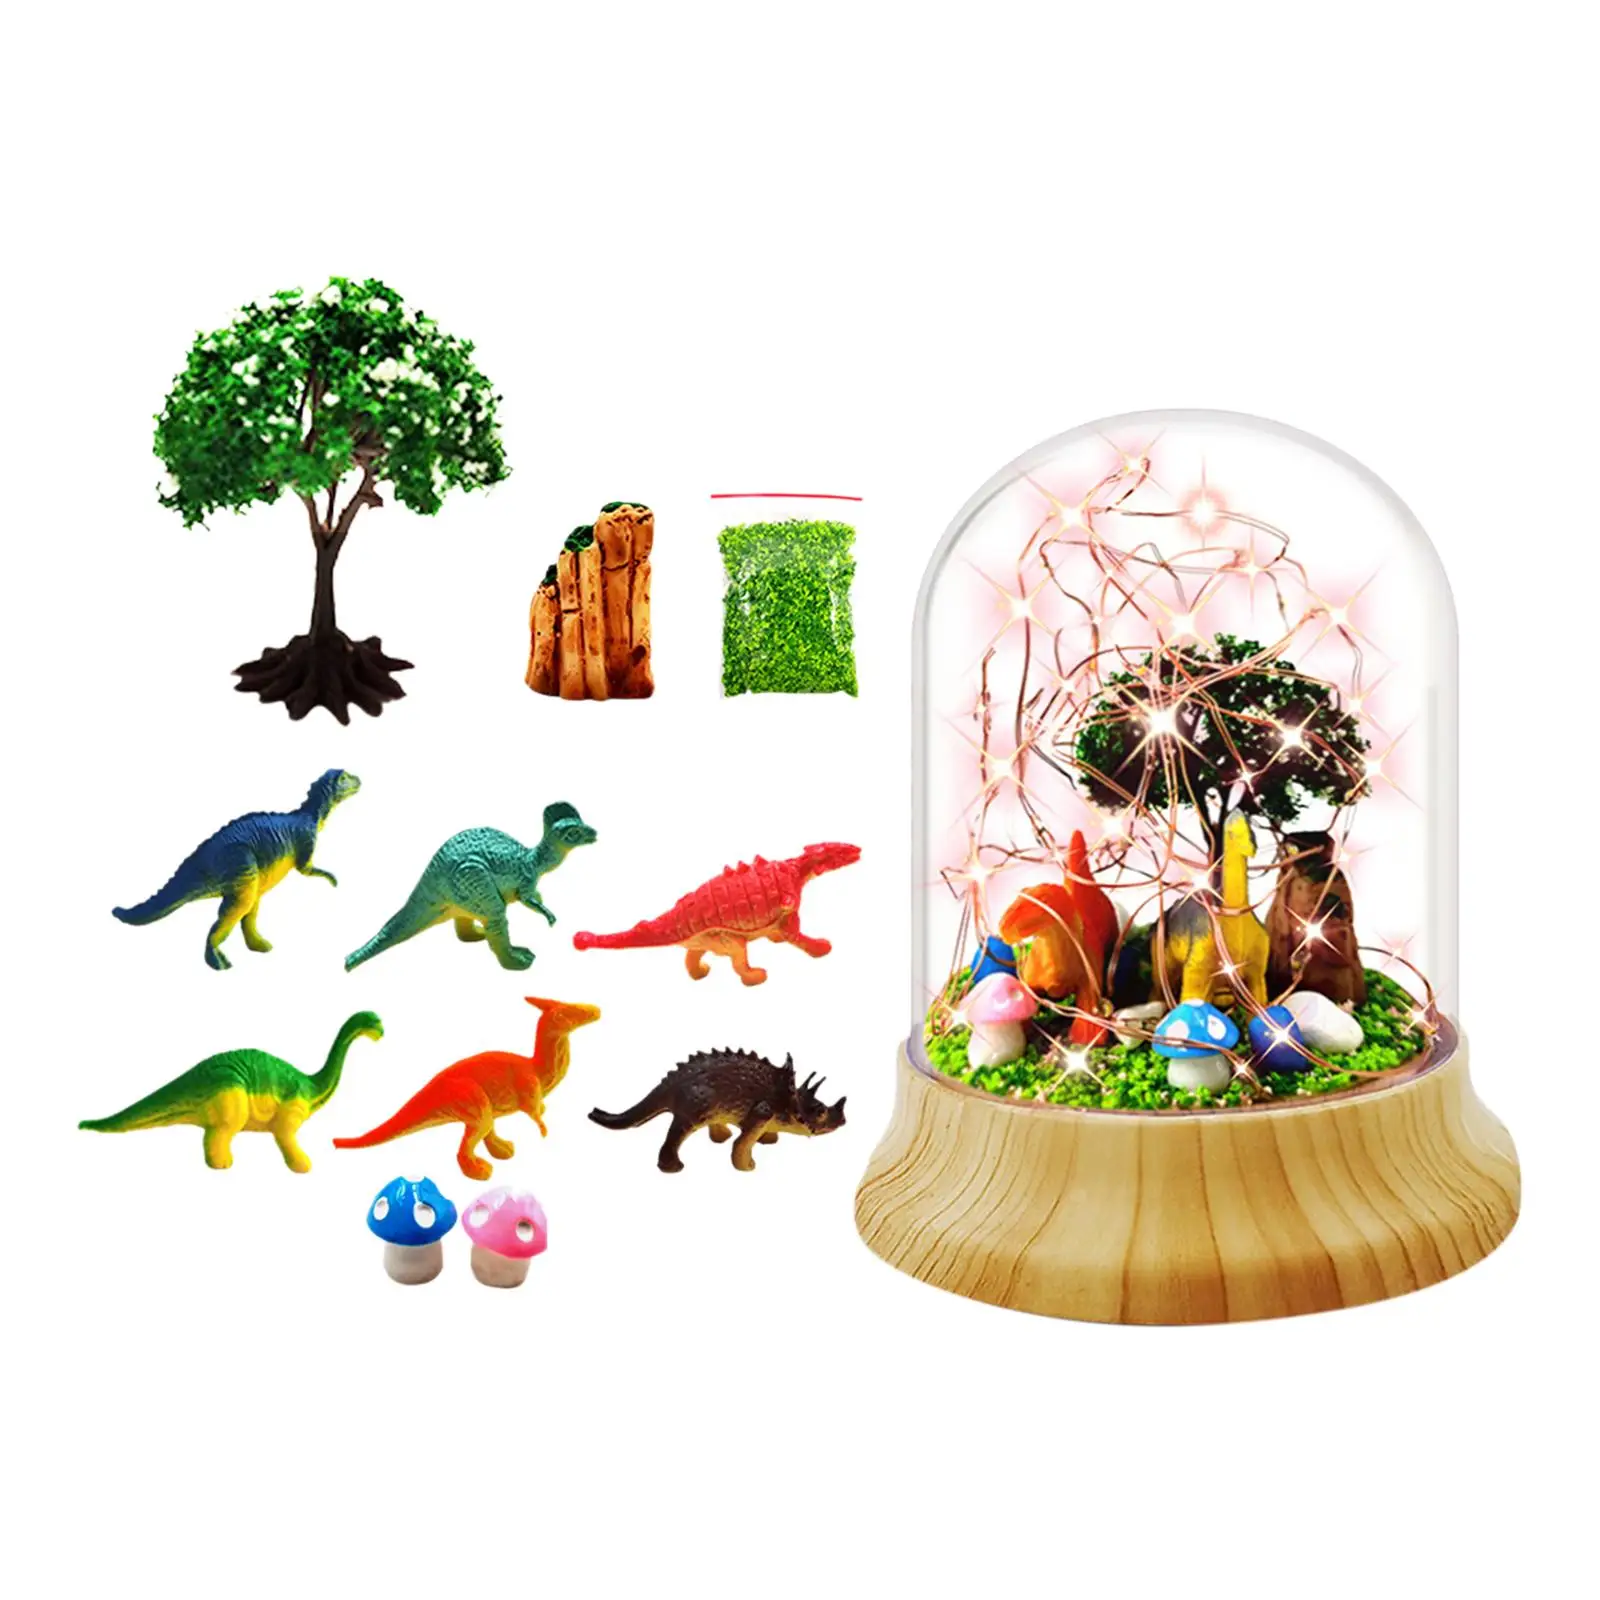 Dome Dinosaur Night Light DIY Material Artificial Party Favor Table Night Lamp Desk Lamp LED for Birthday Present Decorations